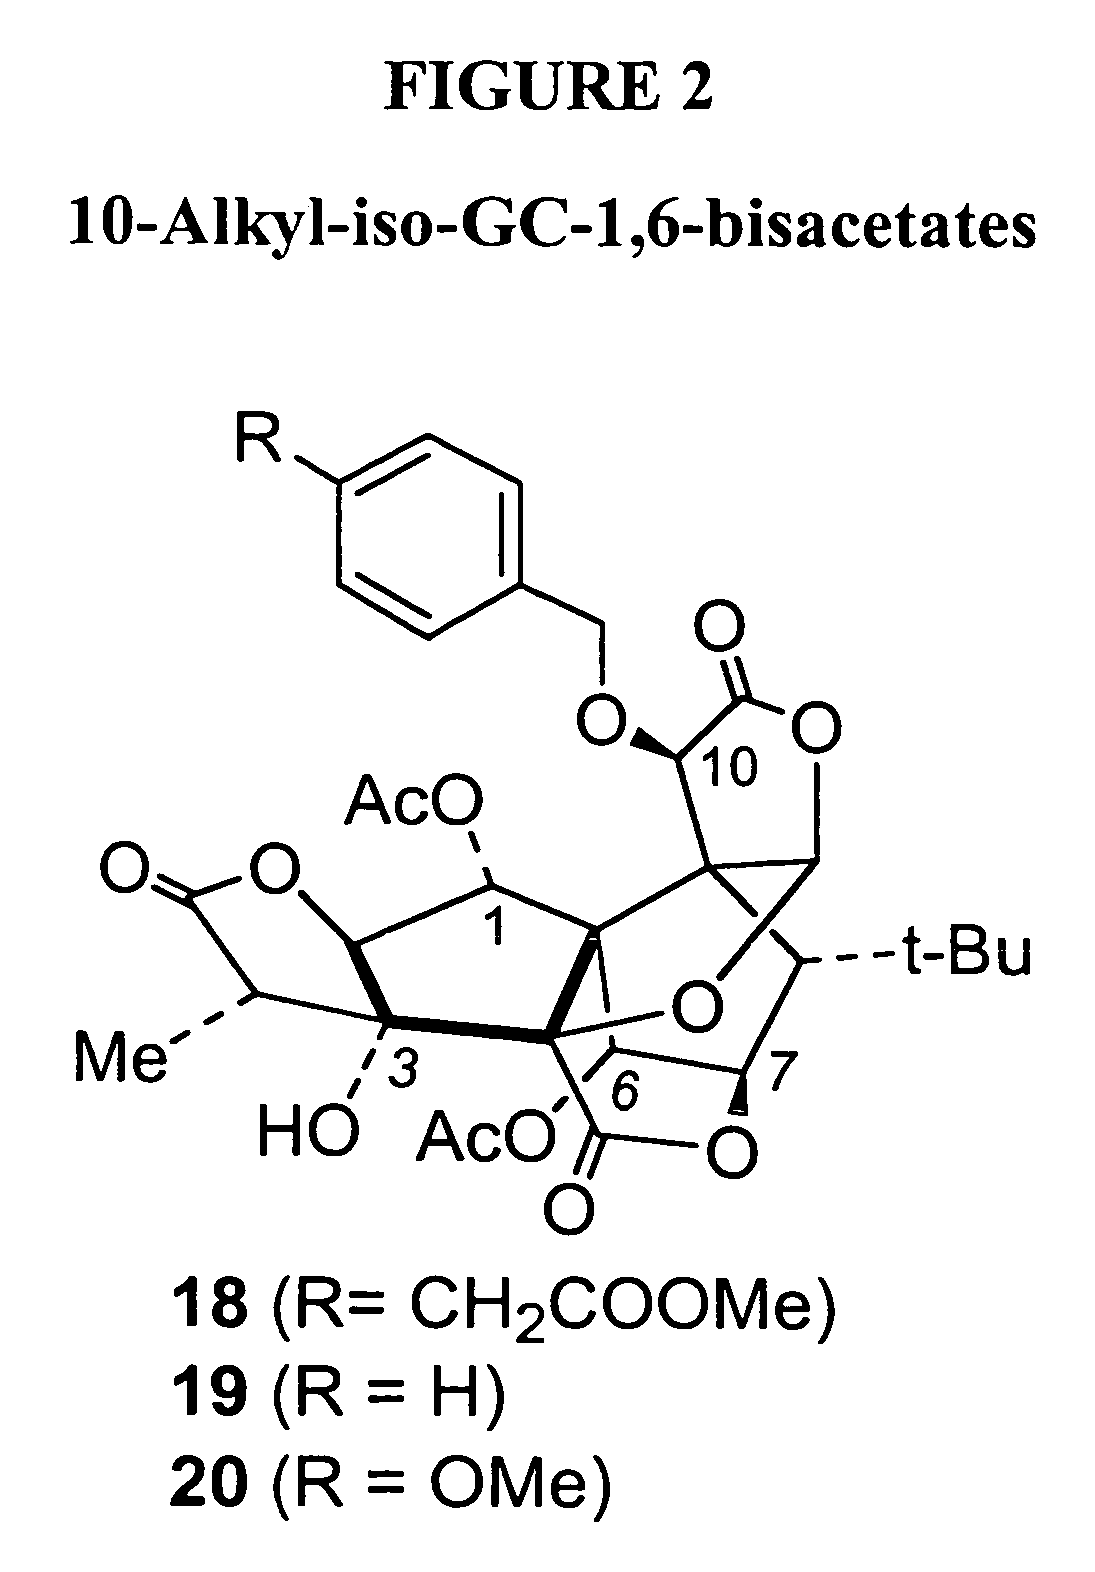 Synthesis of derivatives of ginkgolide C